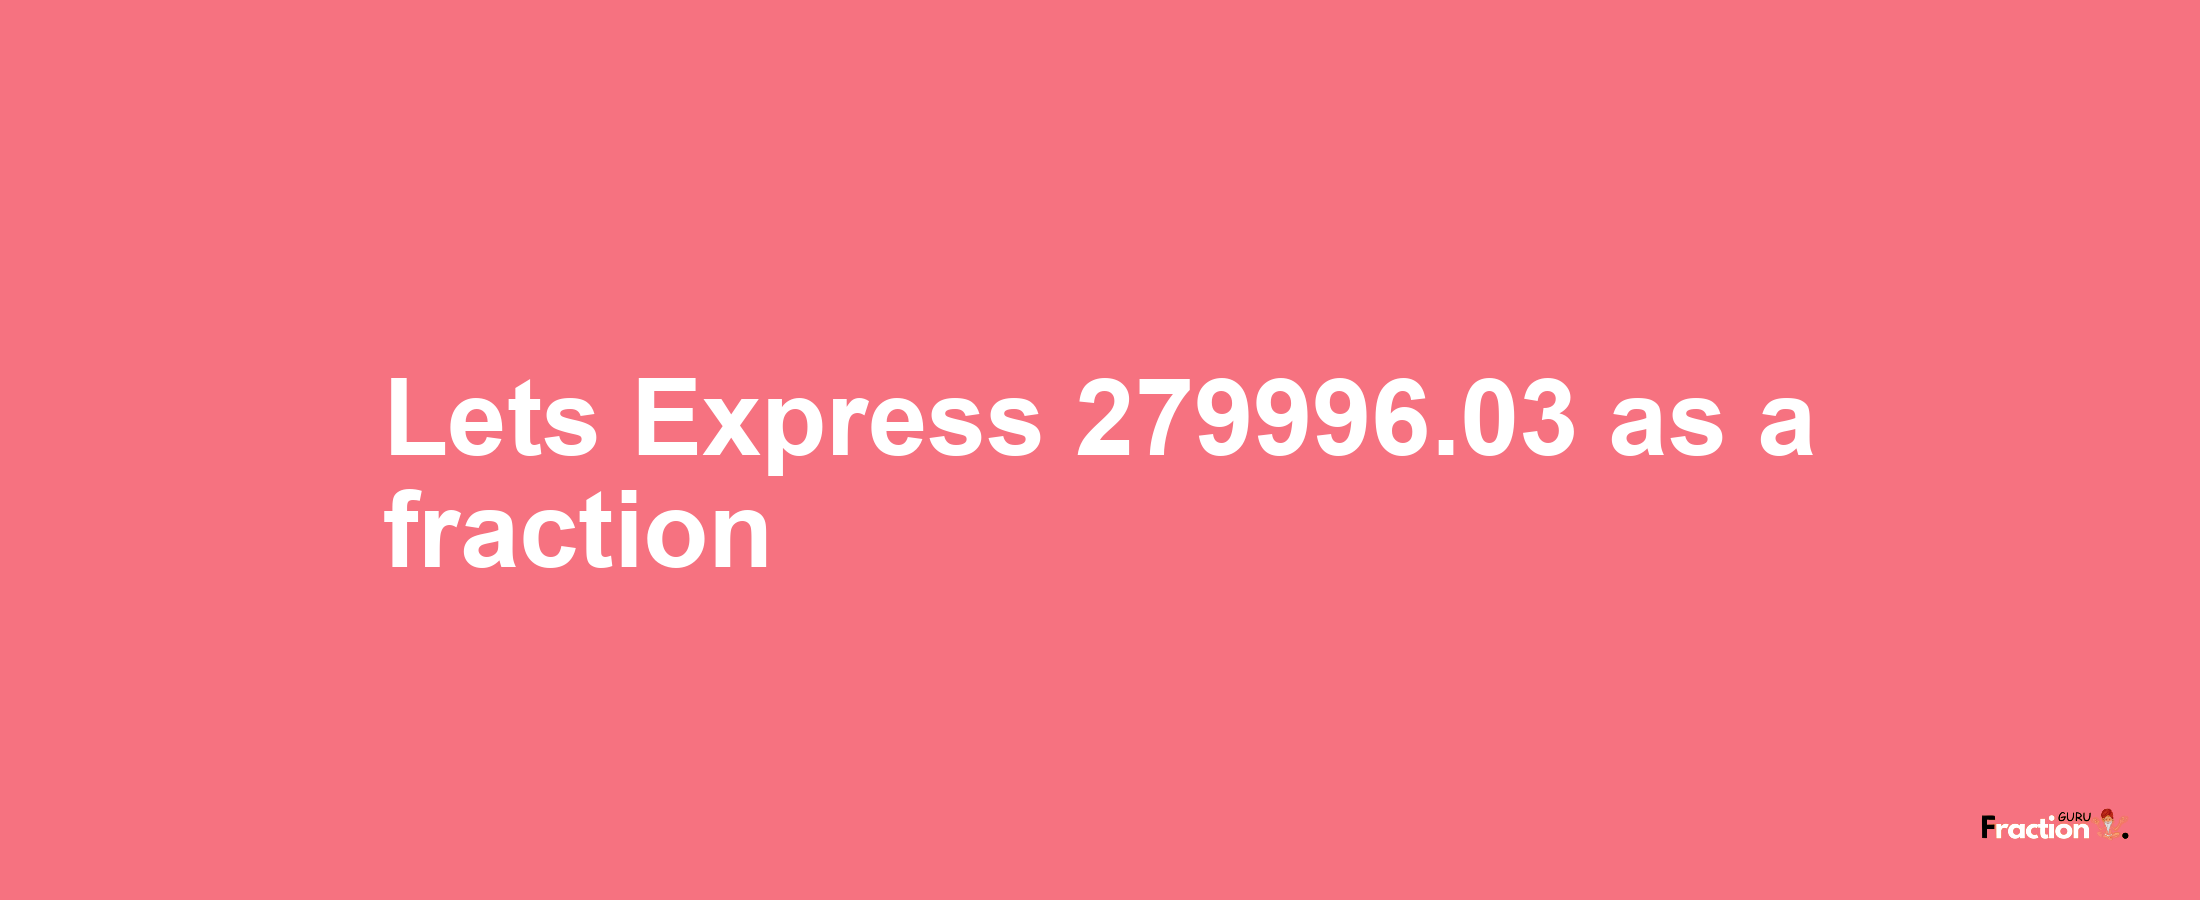 Lets Express 279996.03 as afraction